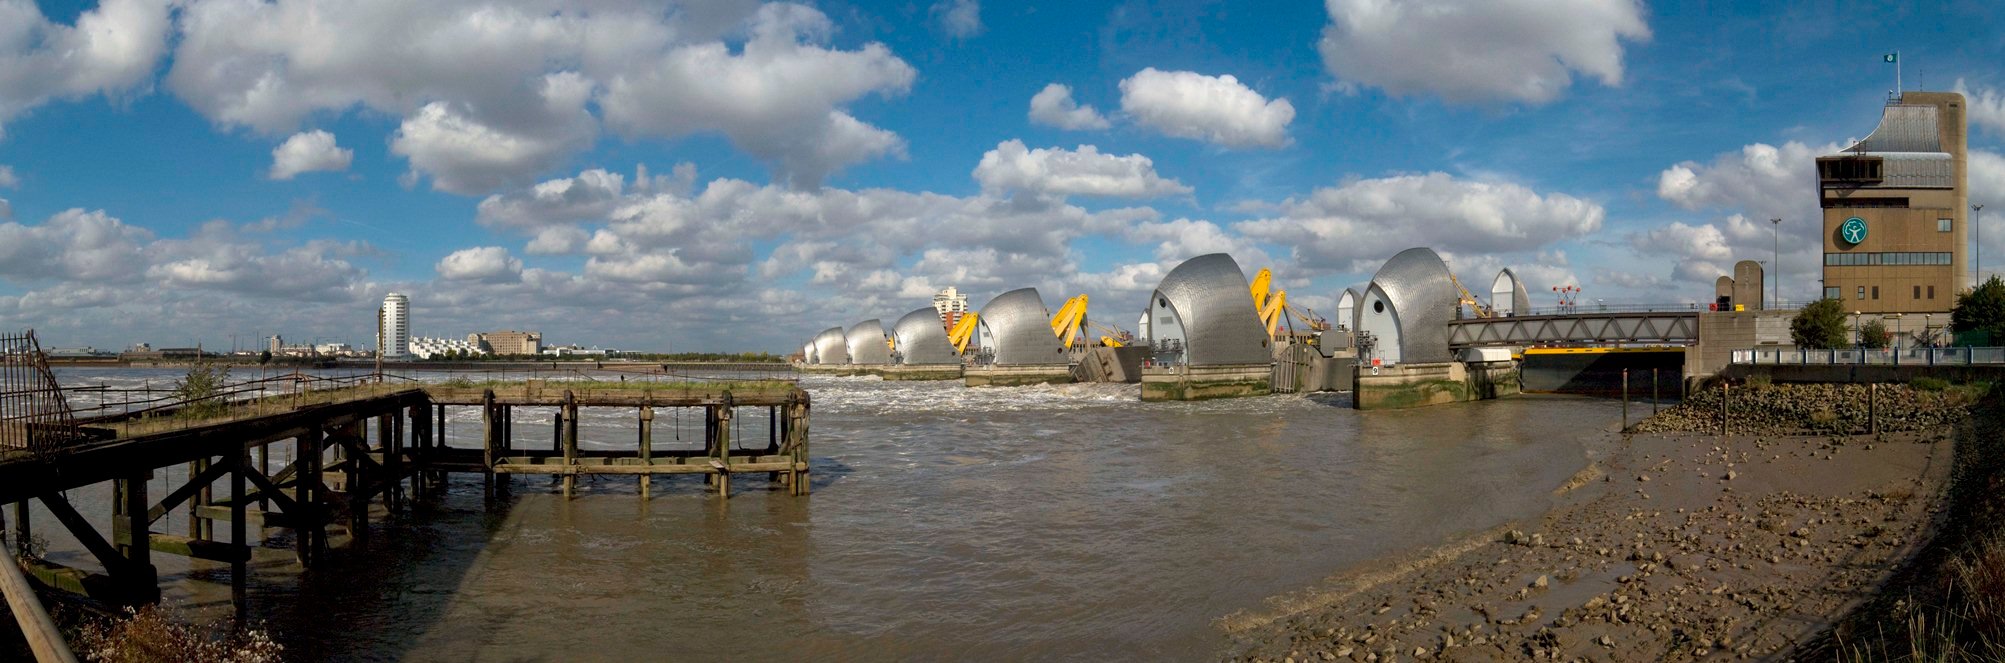 A wide angled photograph of a jetty and rocky foreshore in front of the Thames Barrier, London.